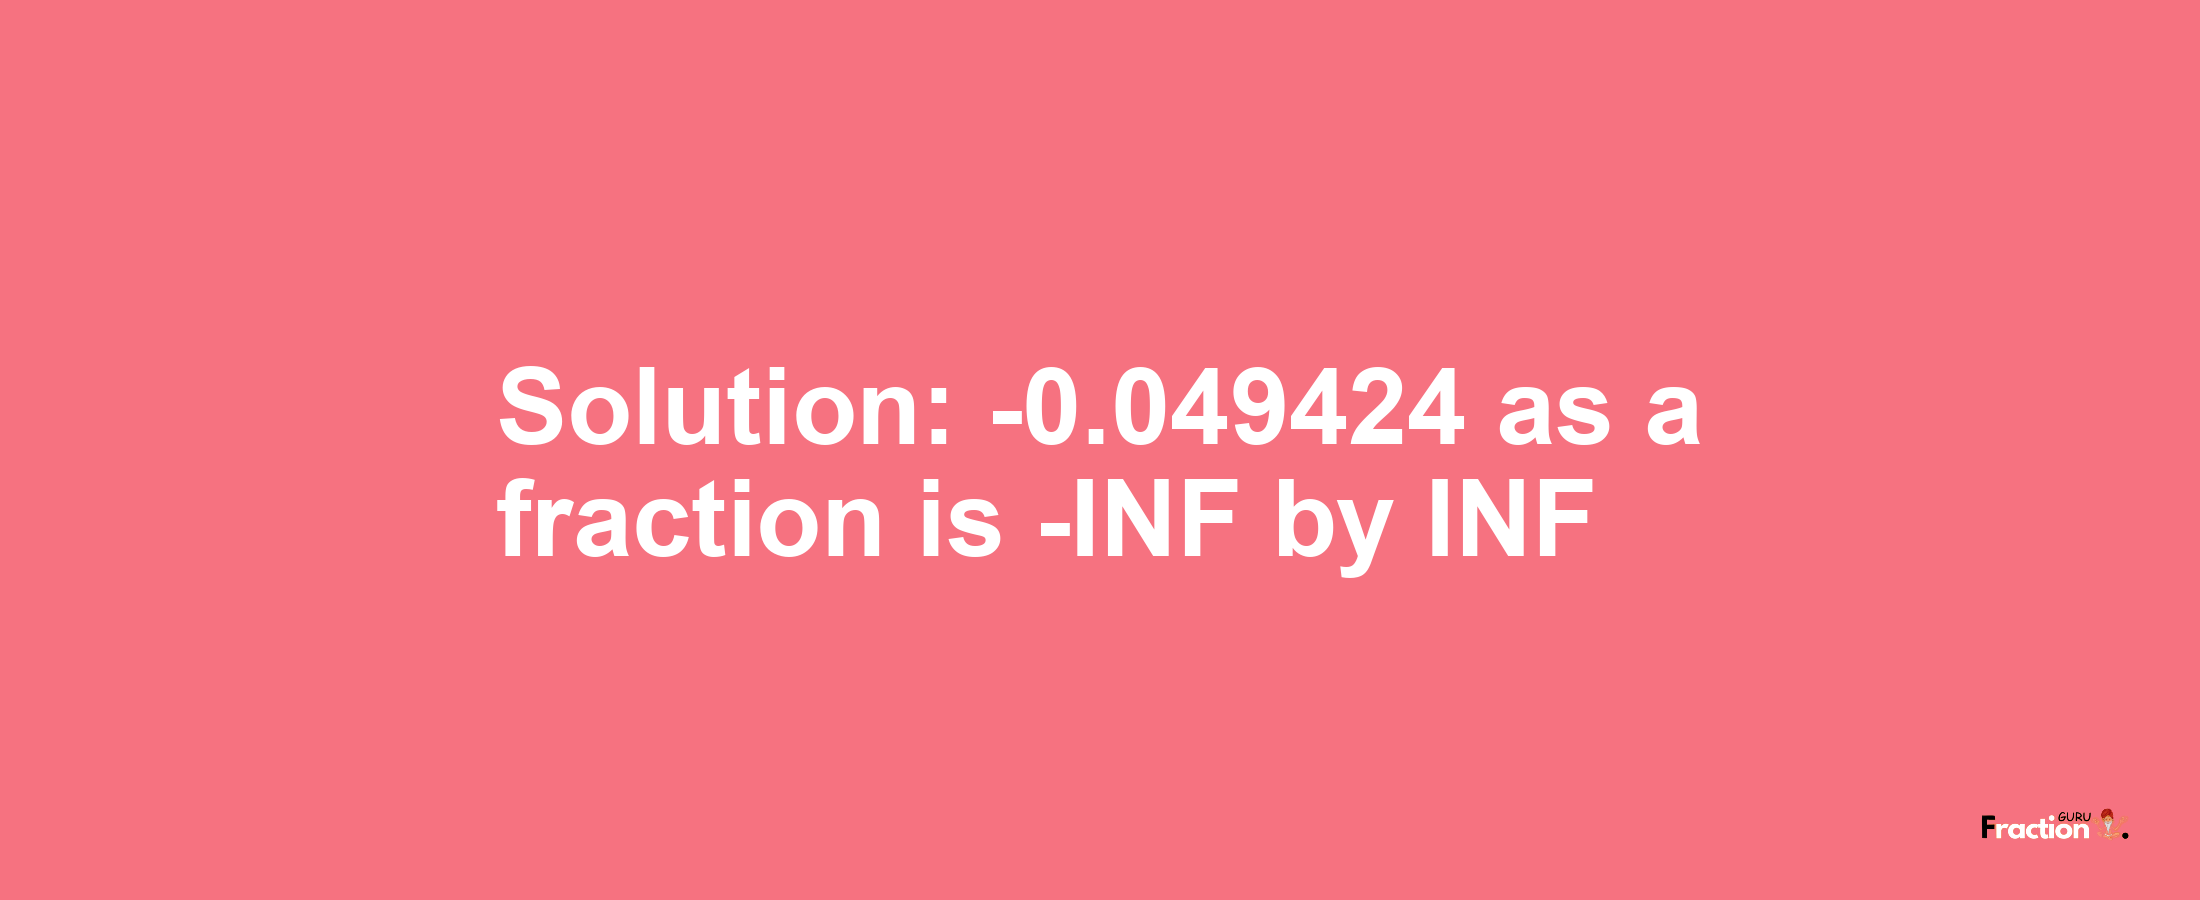 Solution:-0.049424 as a fraction is -INF/INF